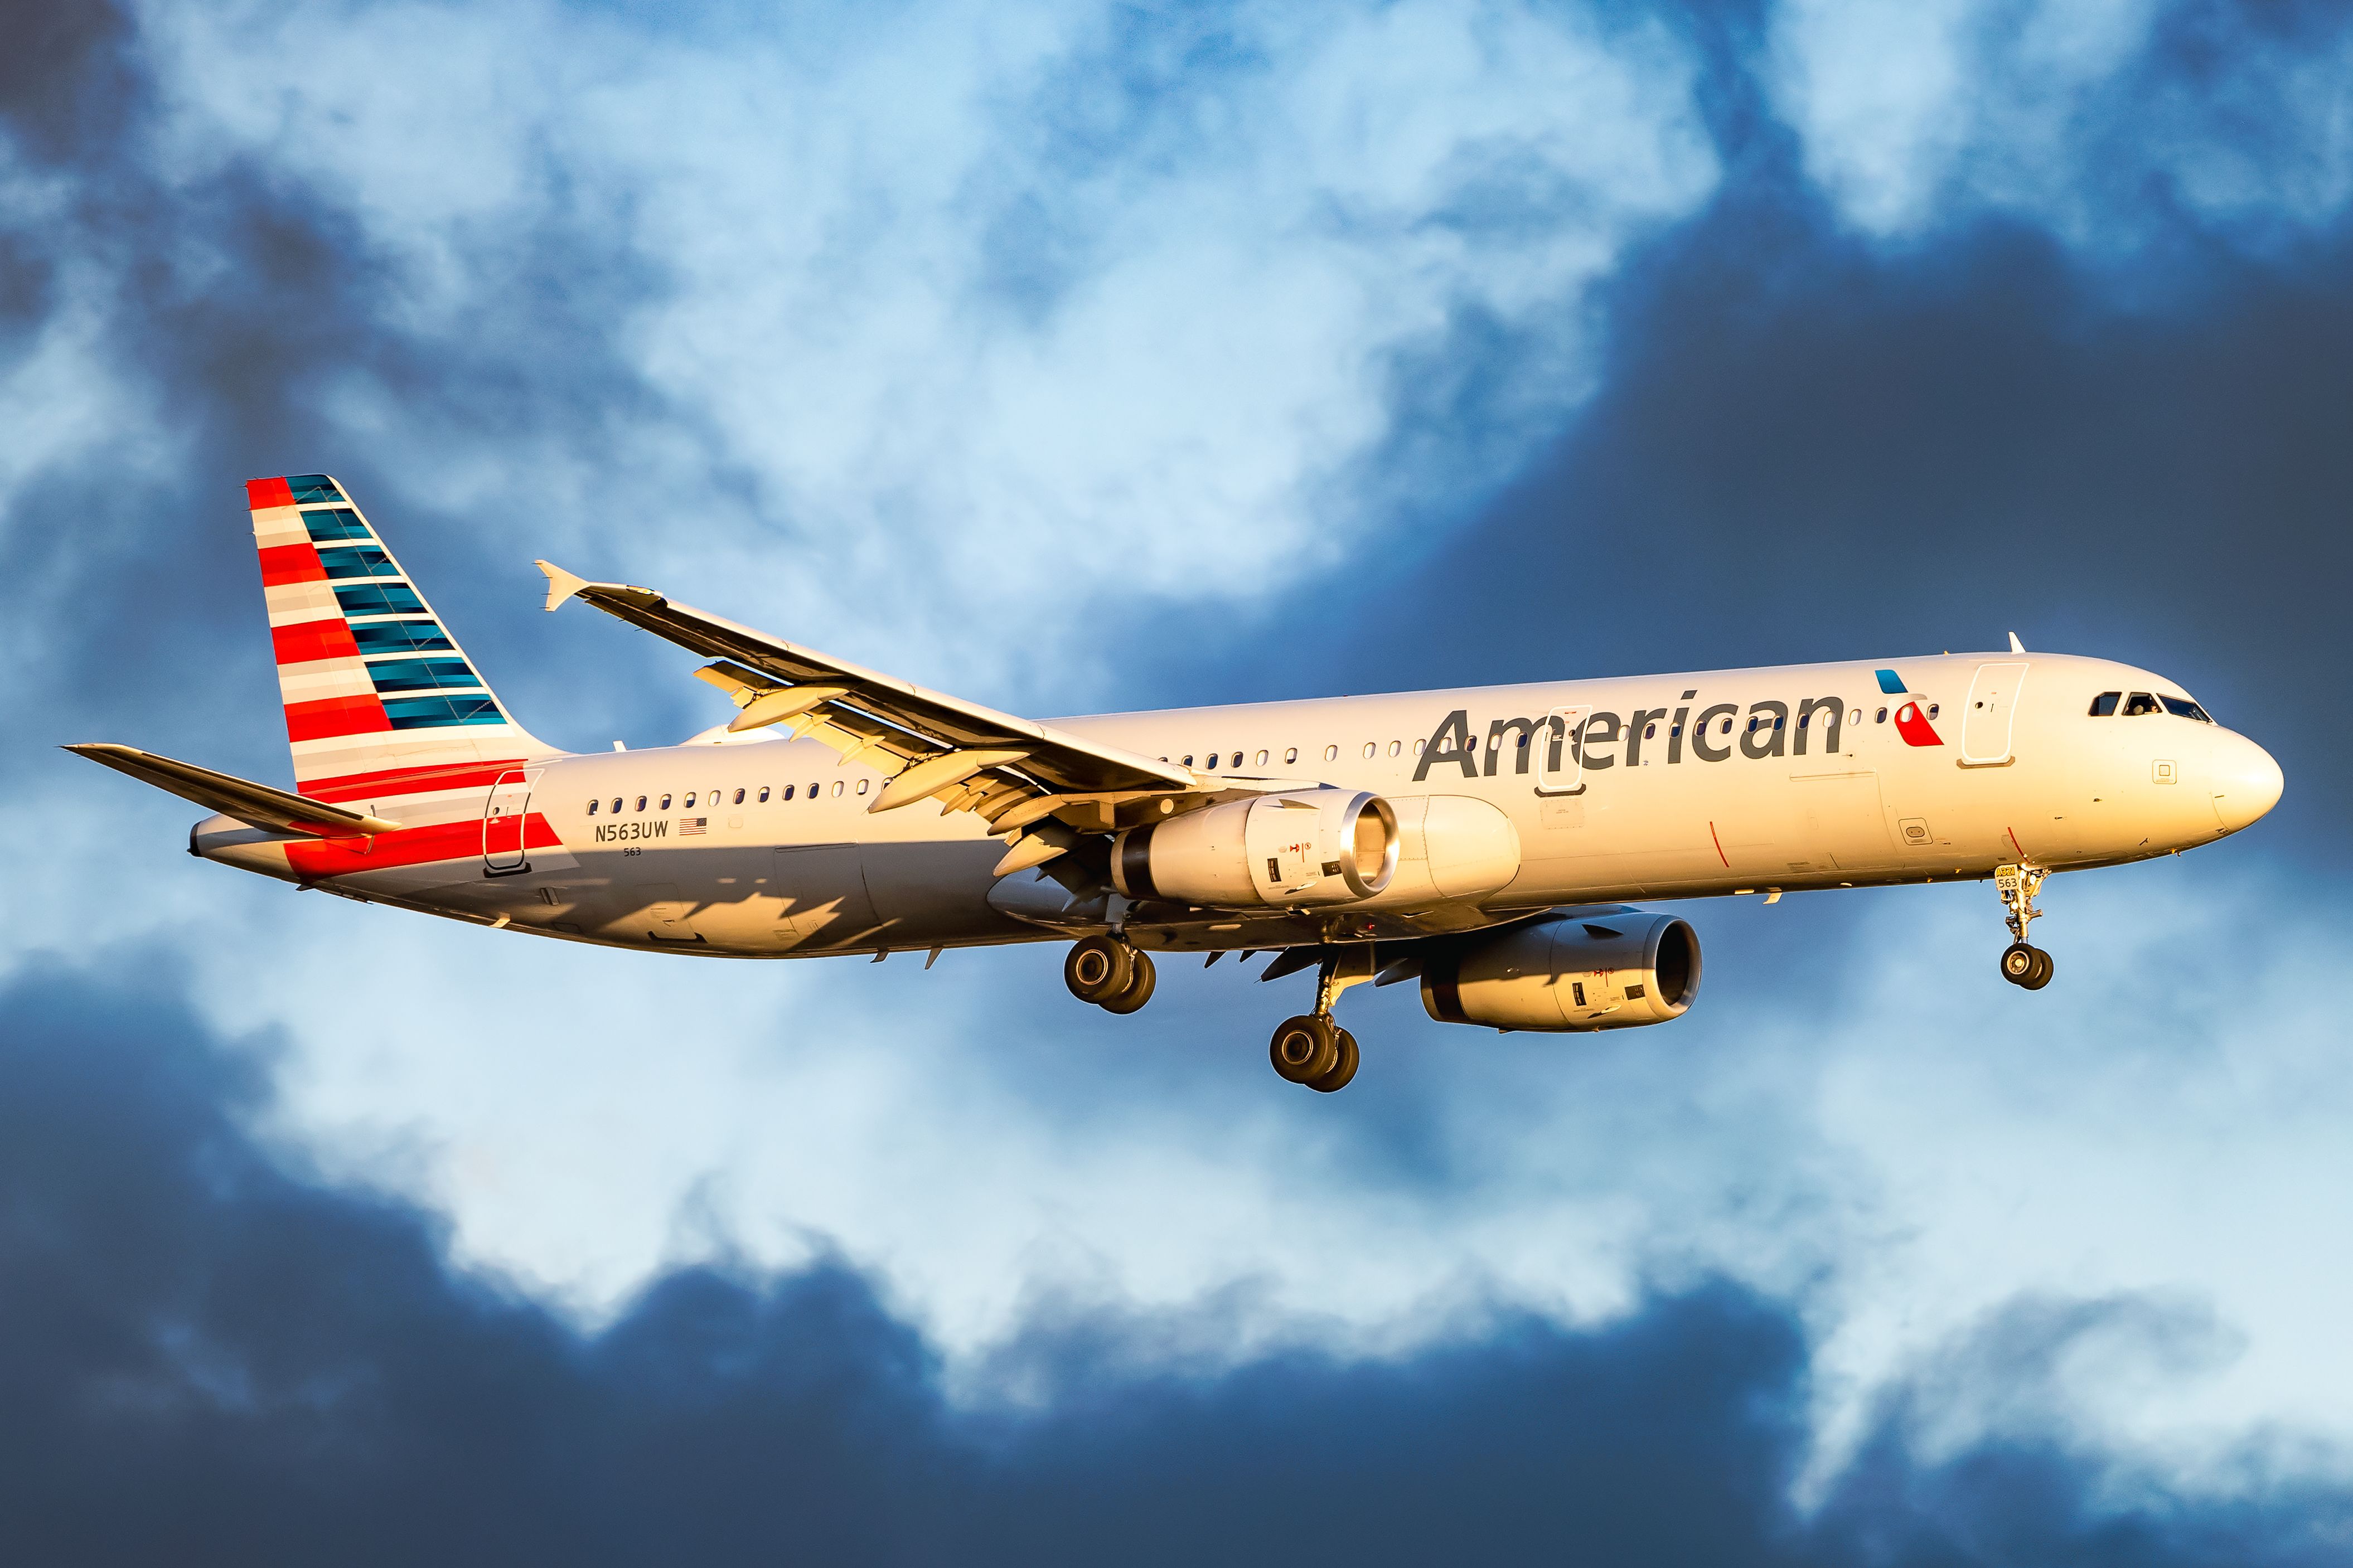 American Airlines Airbus A321-200